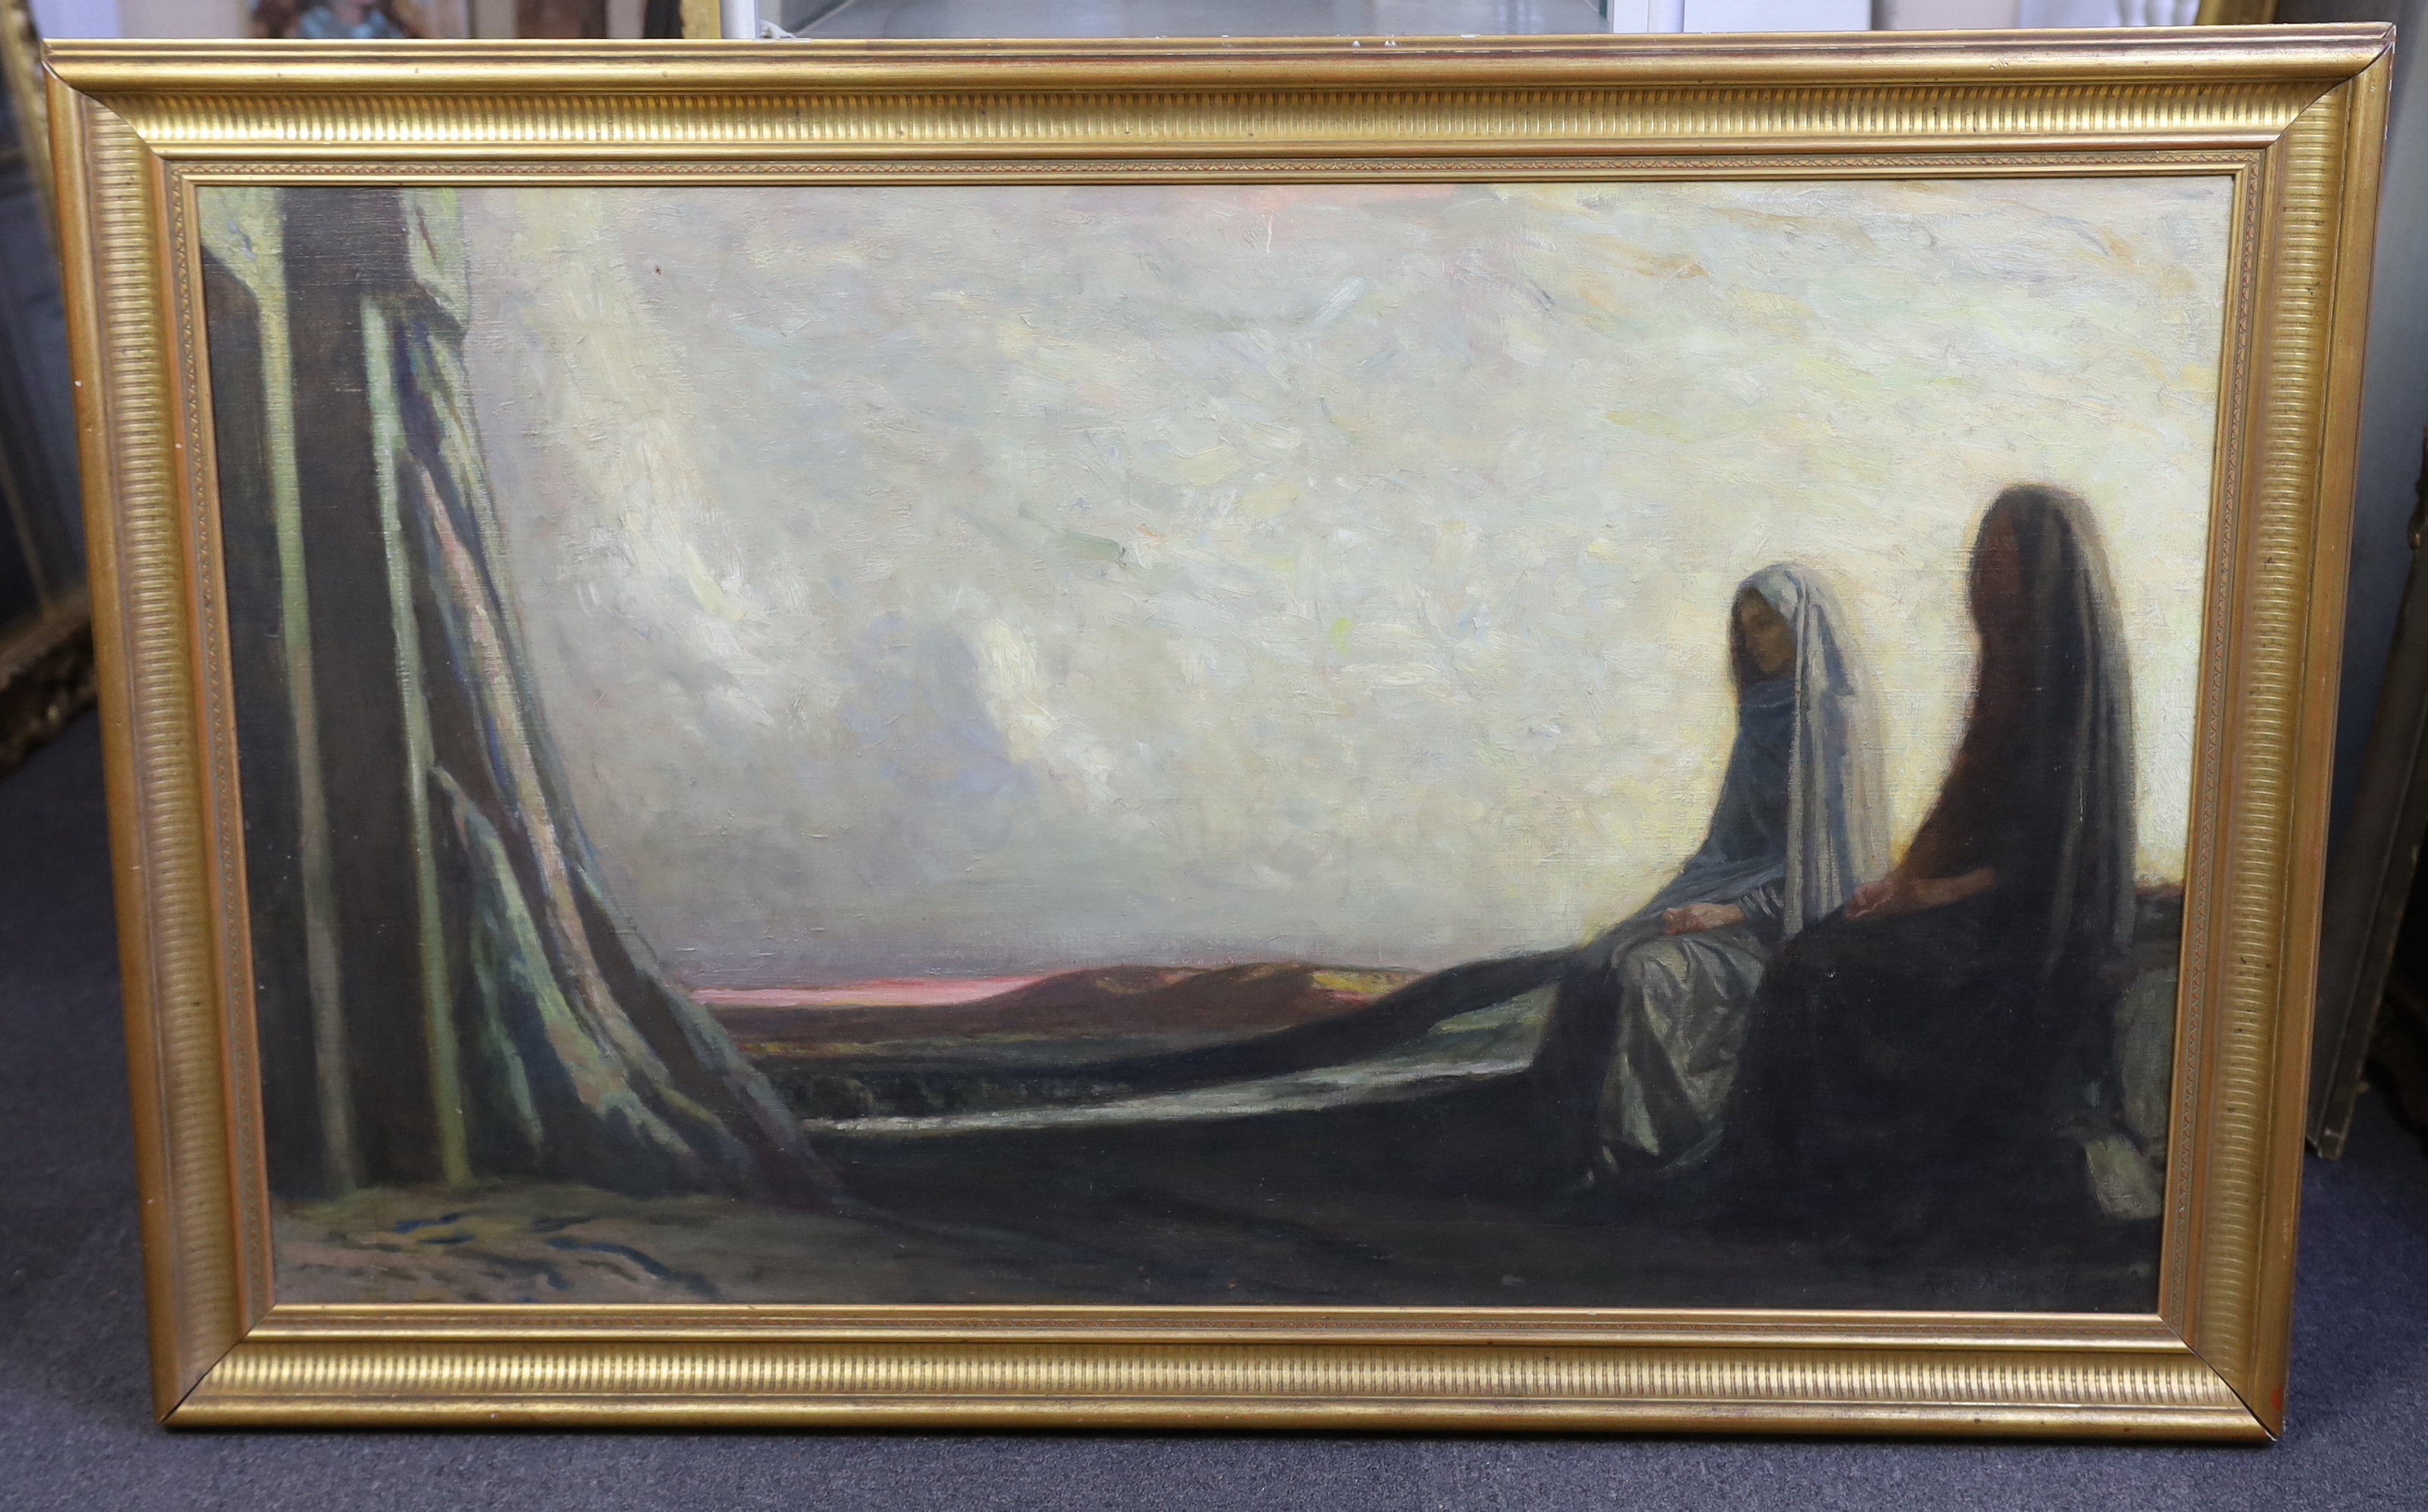 Robert Anning Bell RA RWS (British, 1863-1933), Shrouded figures seated in a landscape, oil on canvas, 75 x 126cm